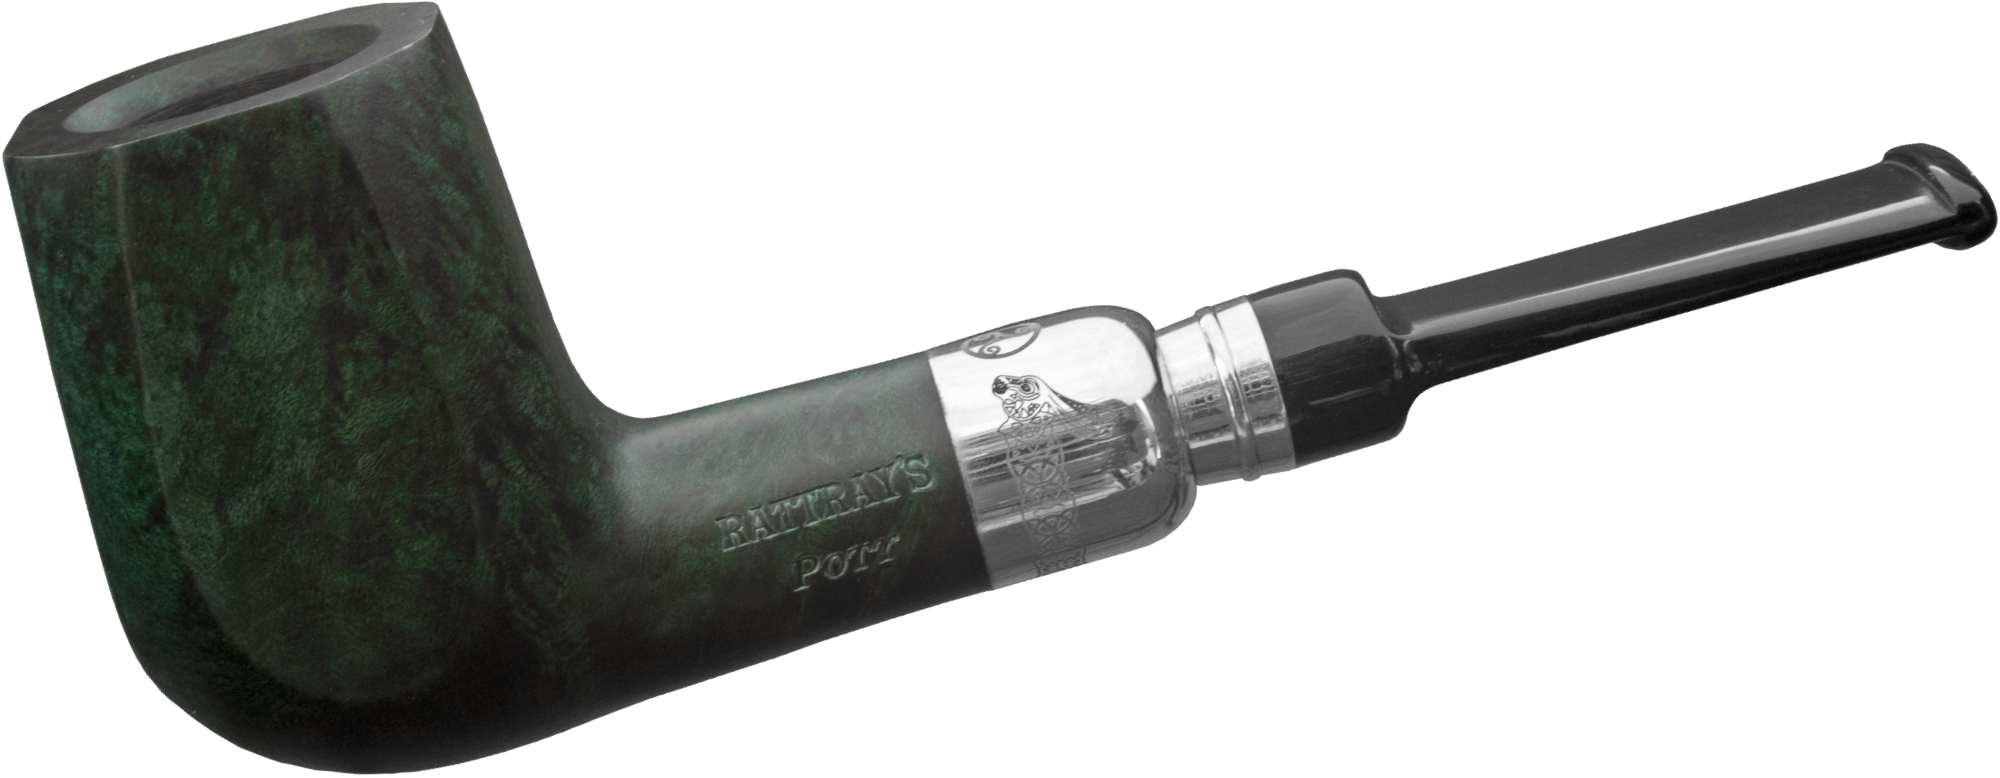 Rattray's Pipe of the Year 2023 Green